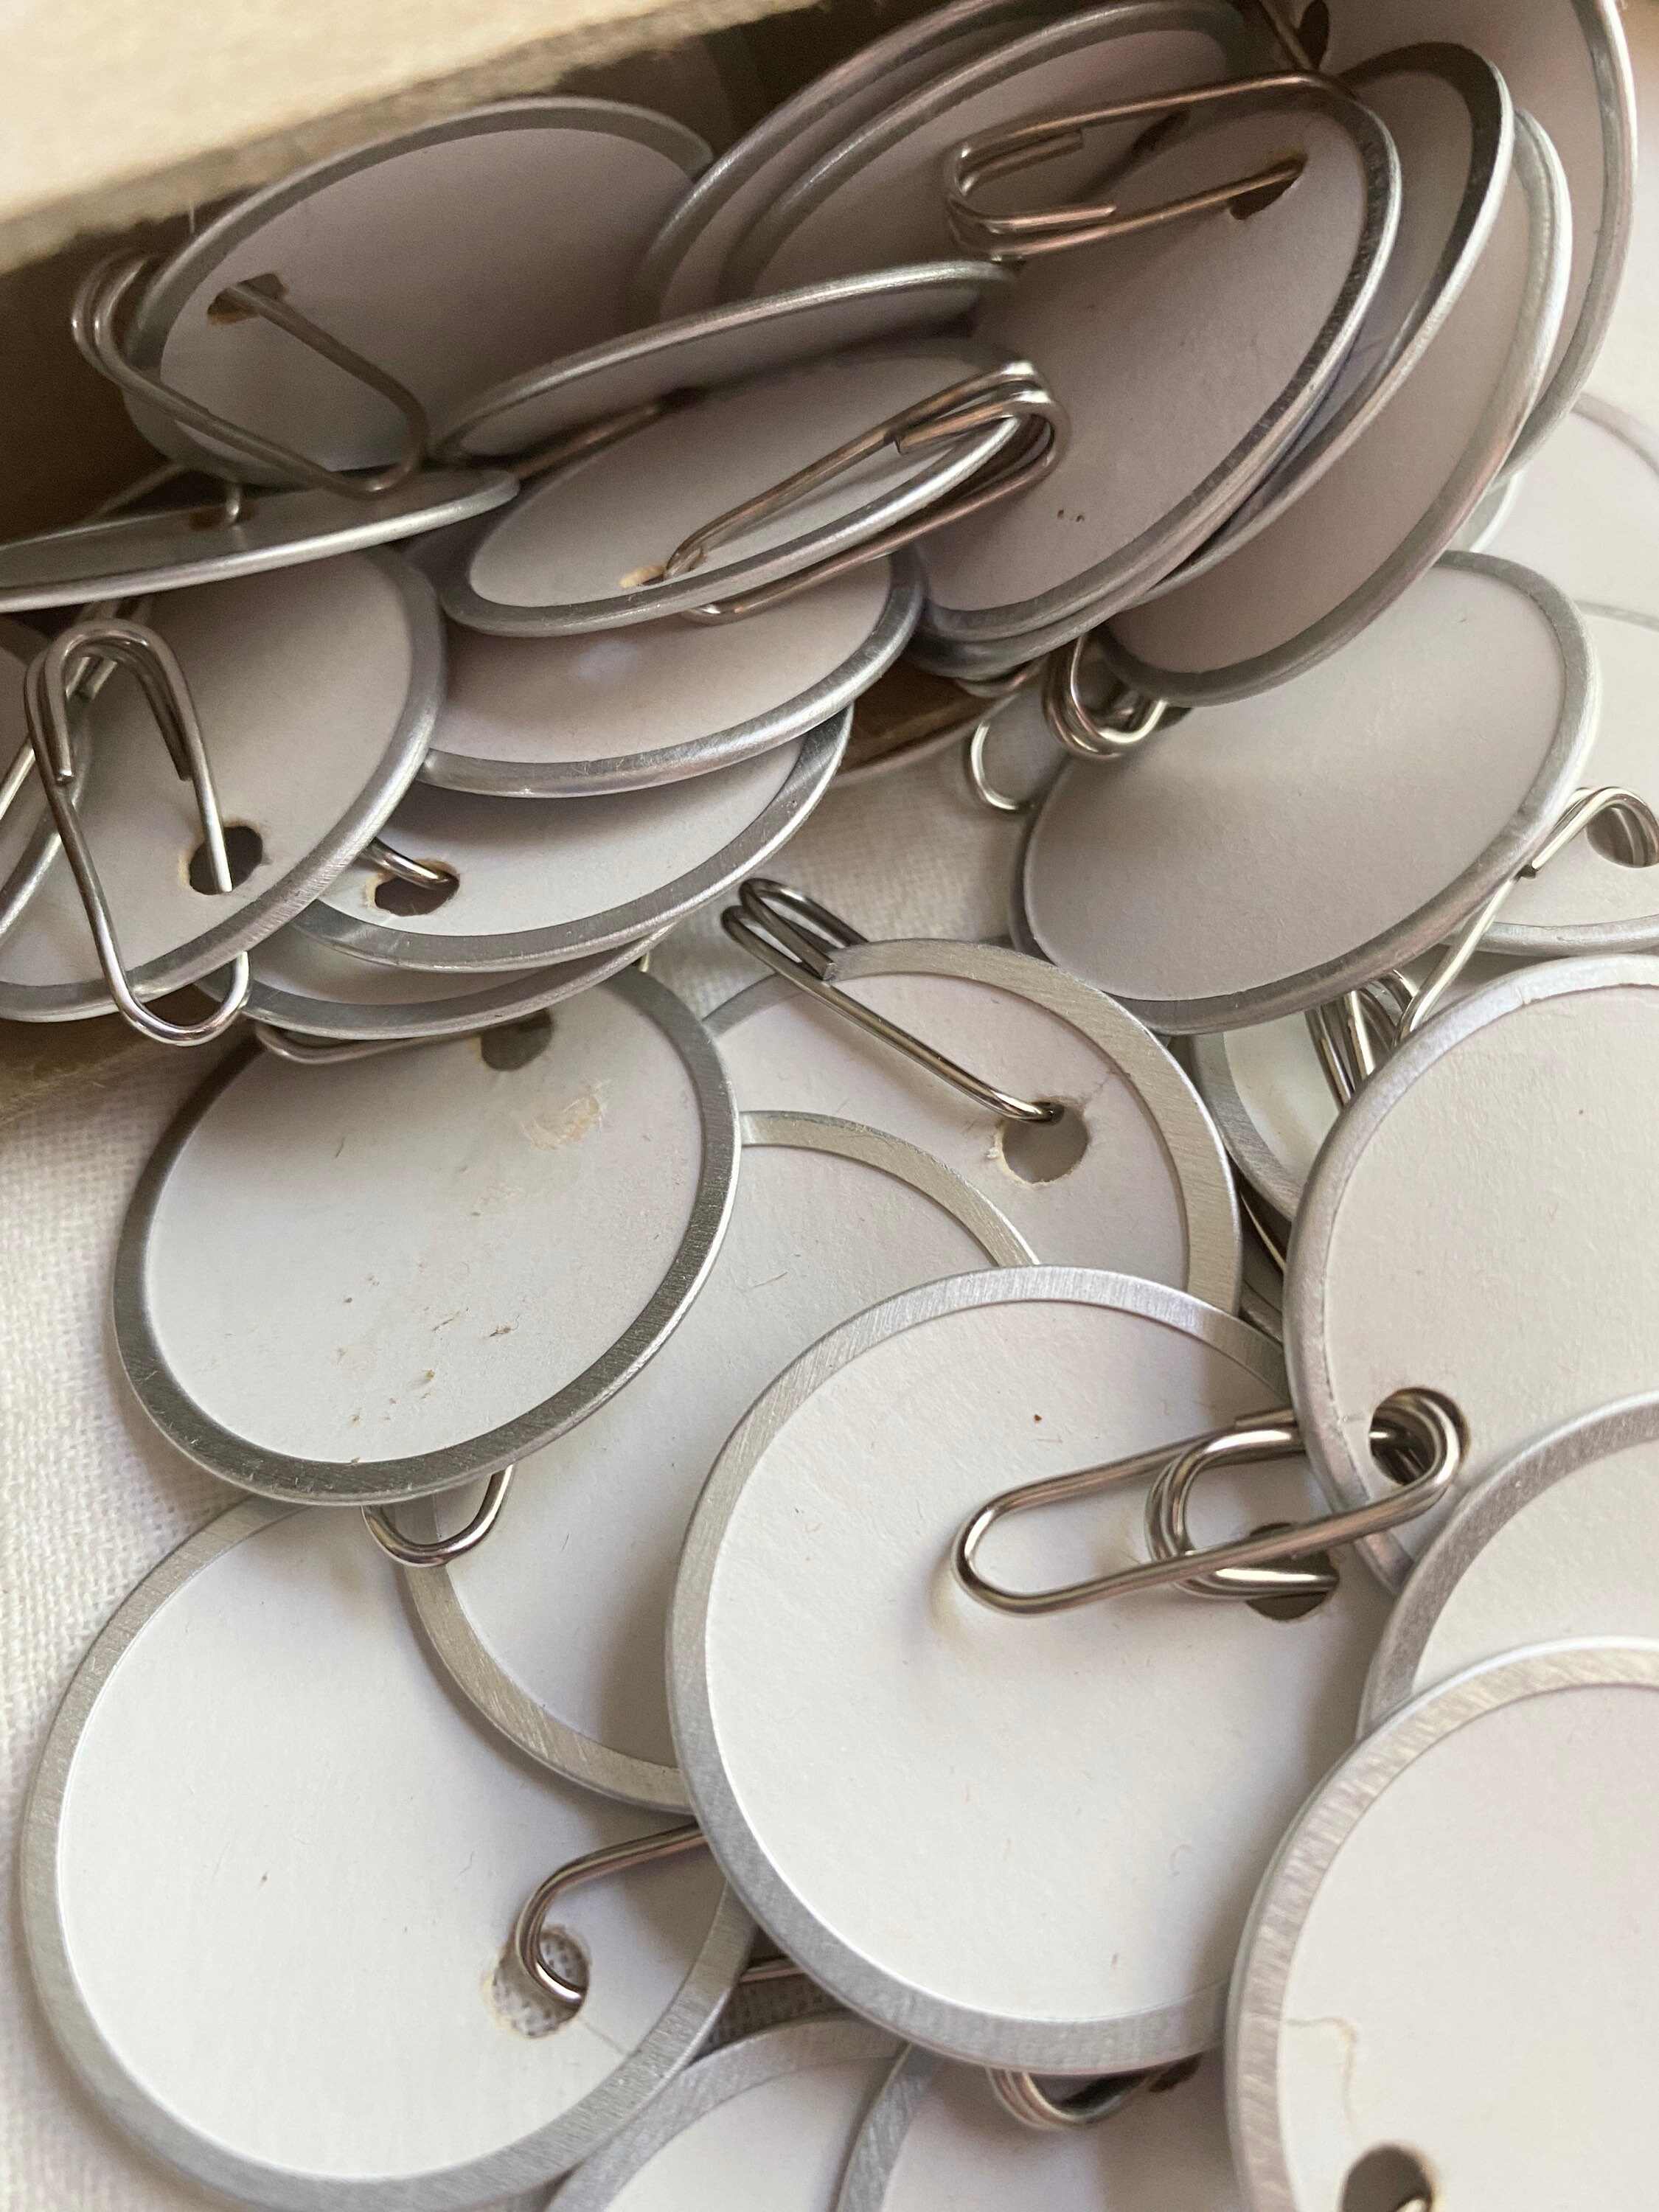 50 Pack 2.25 Metal Rim Key Tags With Strings White Round